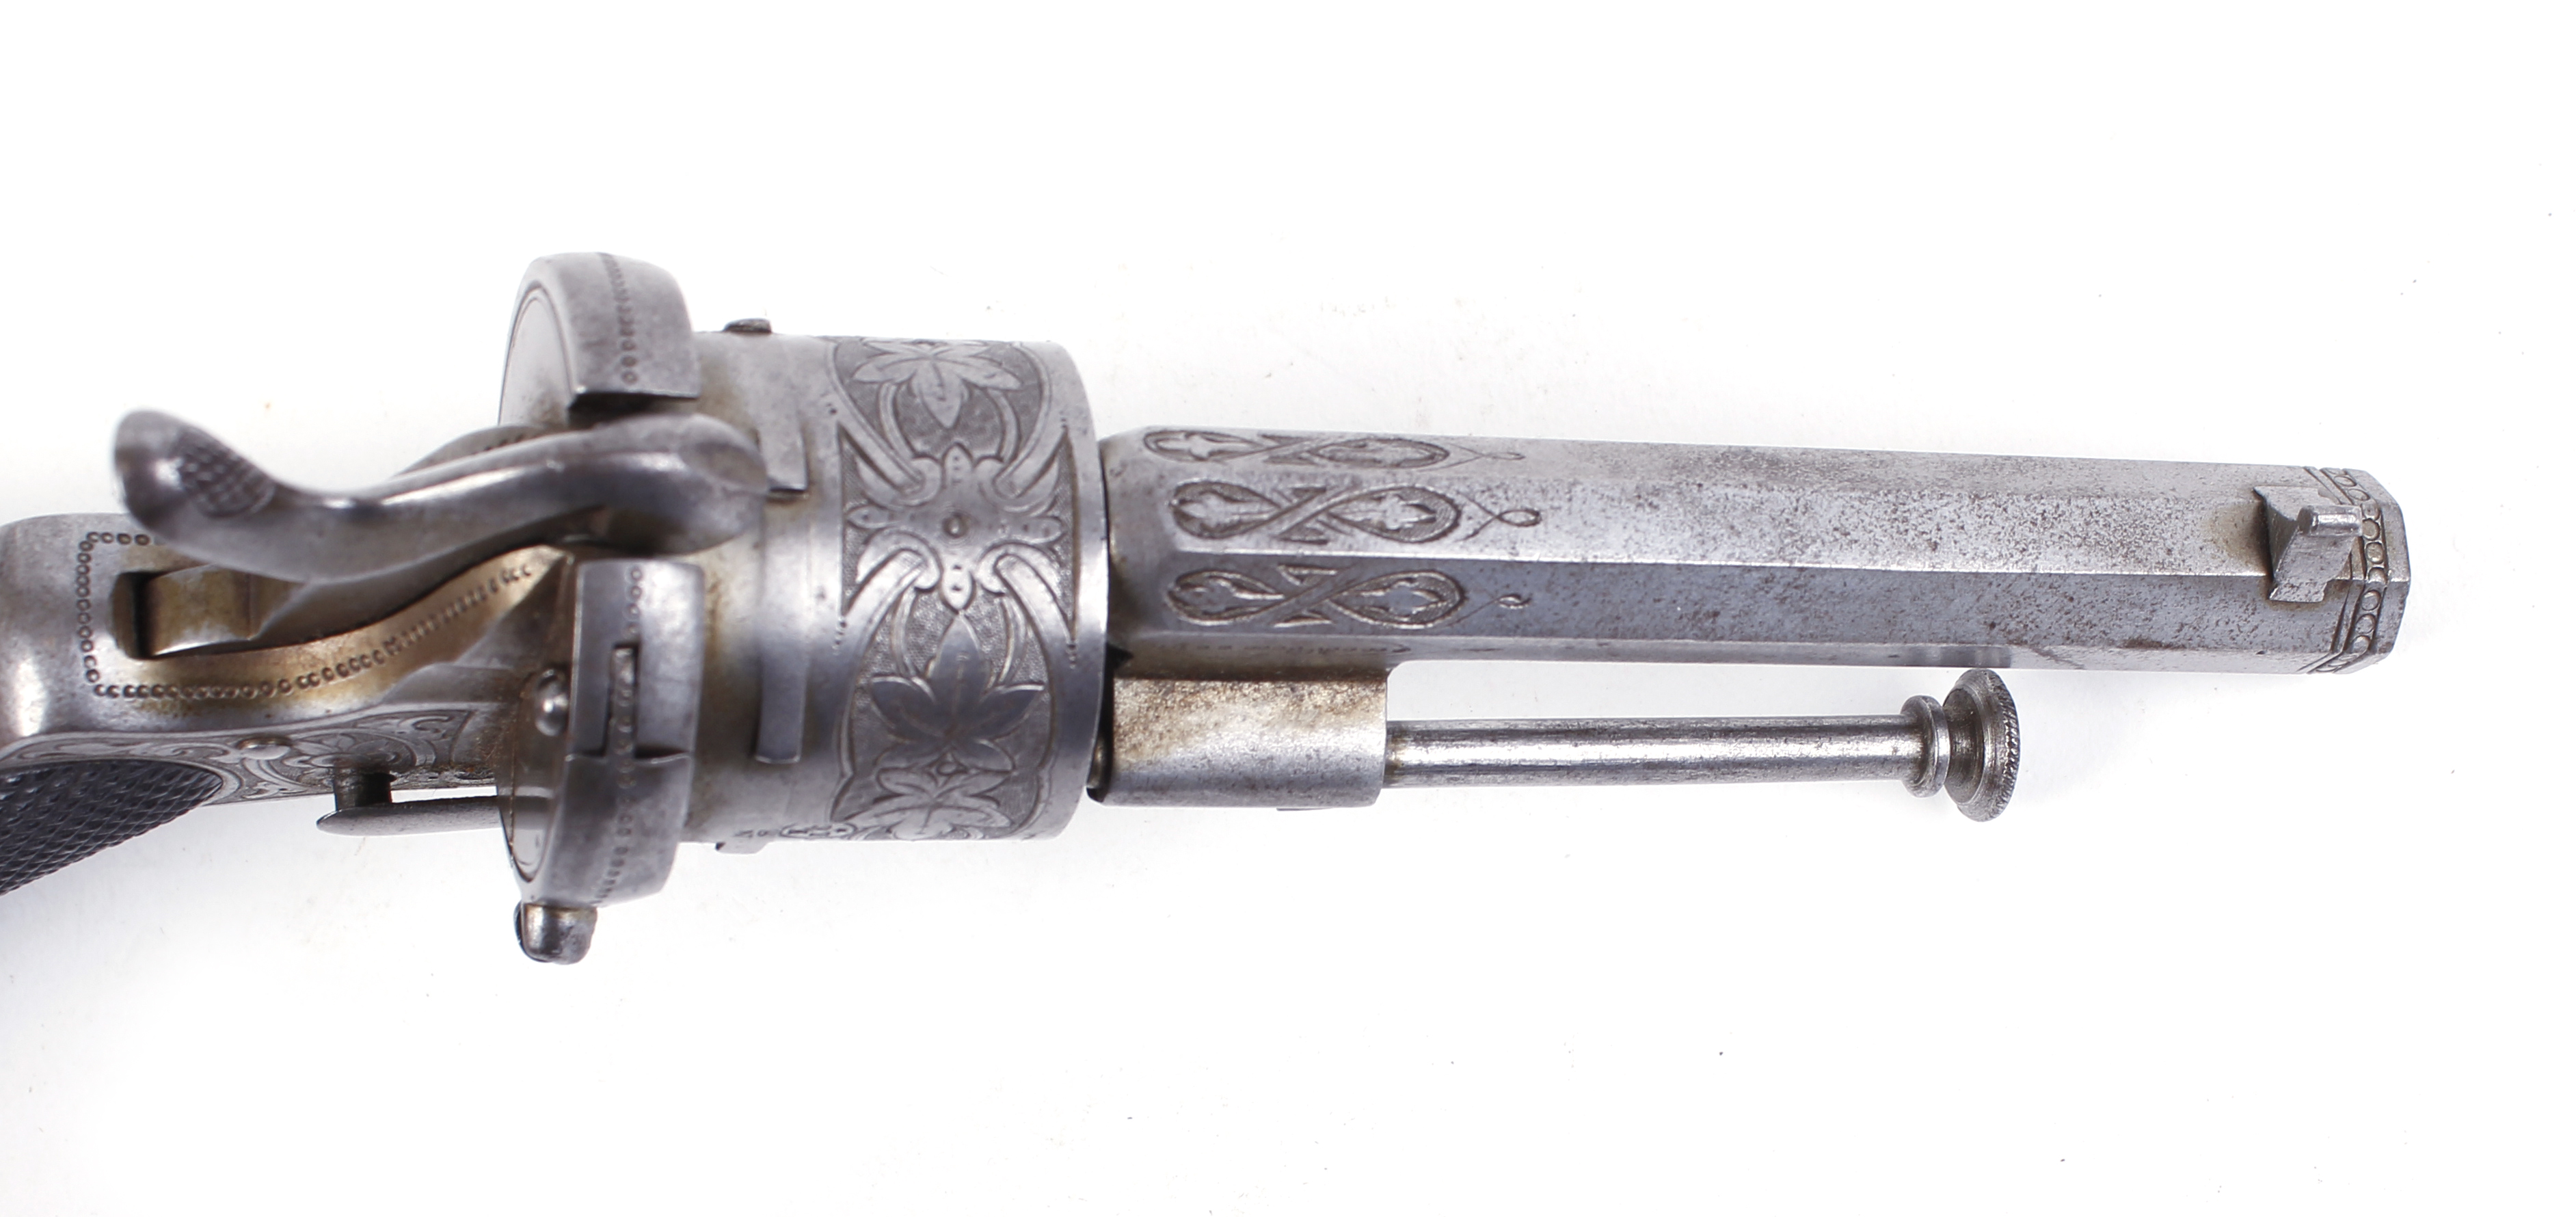 S58 7mm Lefaucheux pinfire revolver, floral relief engraved cylinder and frame, 3¼ ins octagonal - Image 4 of 4